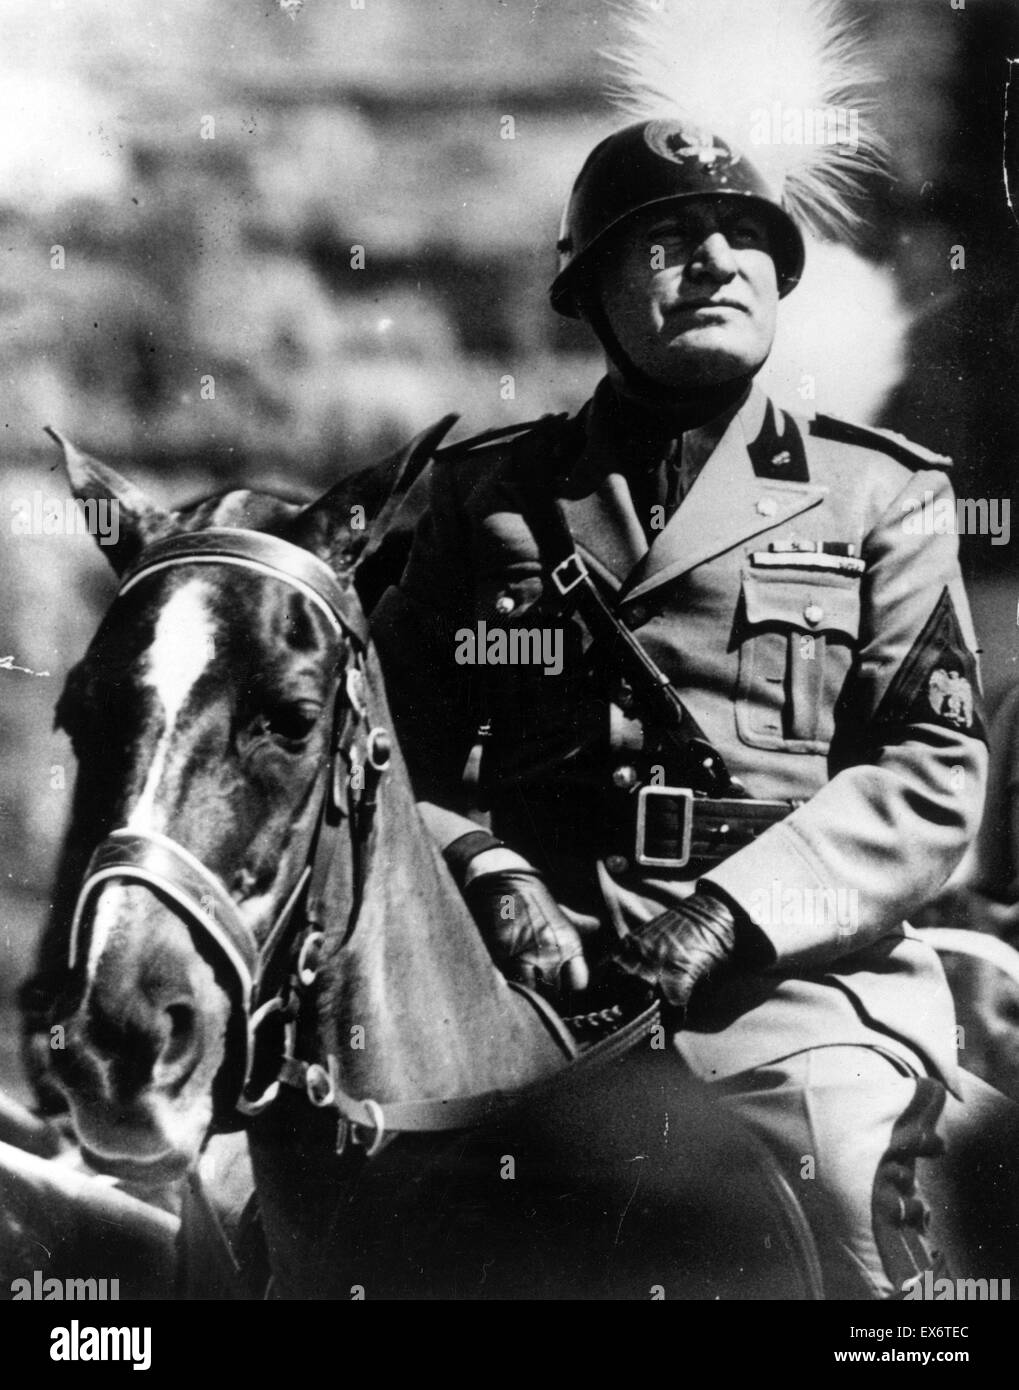 Benito Mussolini (1883 – 28 April 1945) Italian politician, journalist, and leader of the National Fascist Party on horseback in uniform 1936 Stock Photo